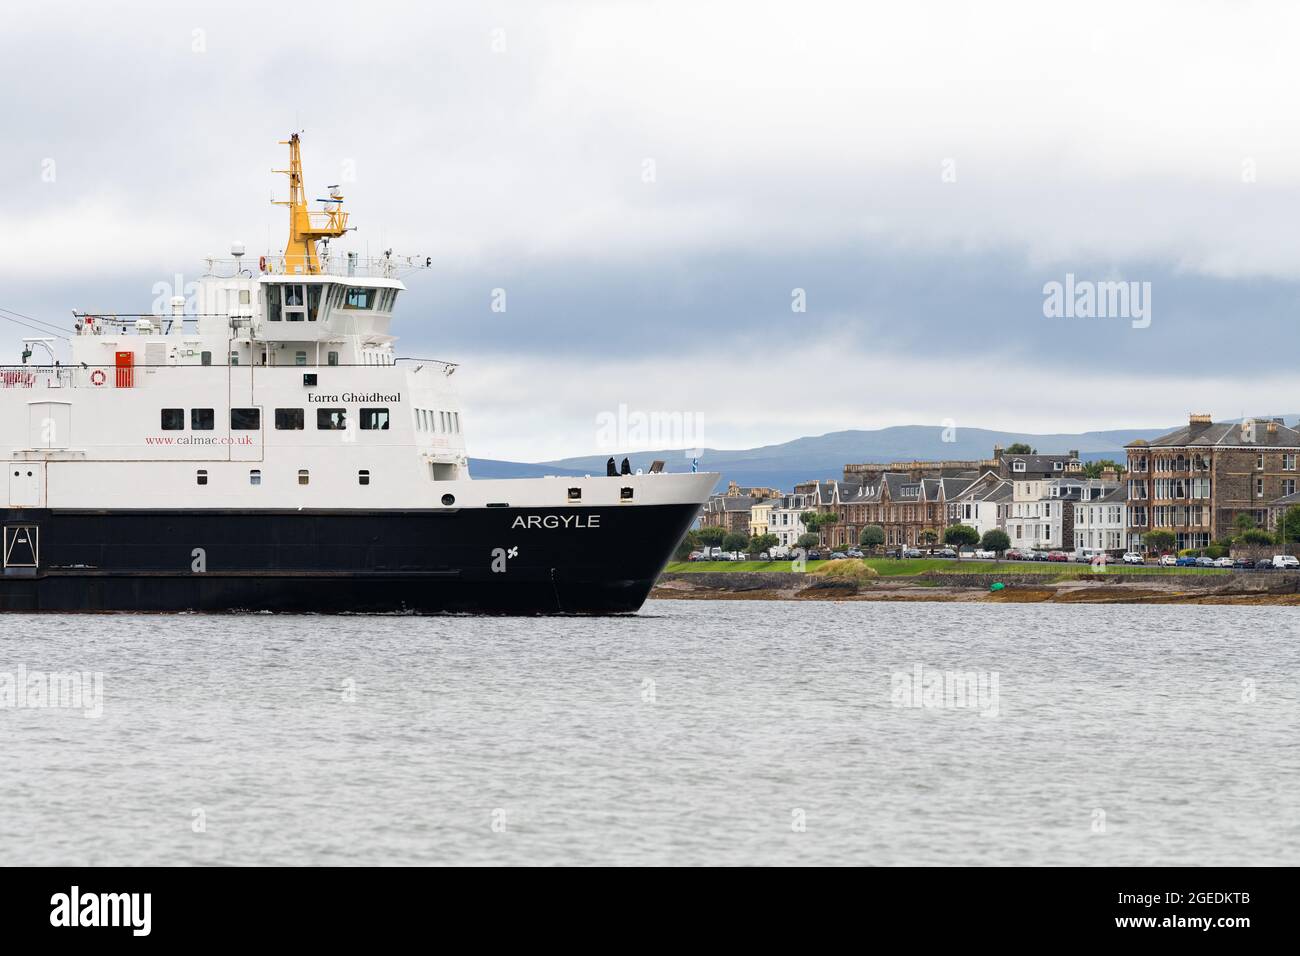 Calmac ferry 'Argyle' arriving at Rothesay, Isle of Bute on the Wemyss Bay Rothesay crossing, Argyll and Bute, Scotland, UK Stock Photo